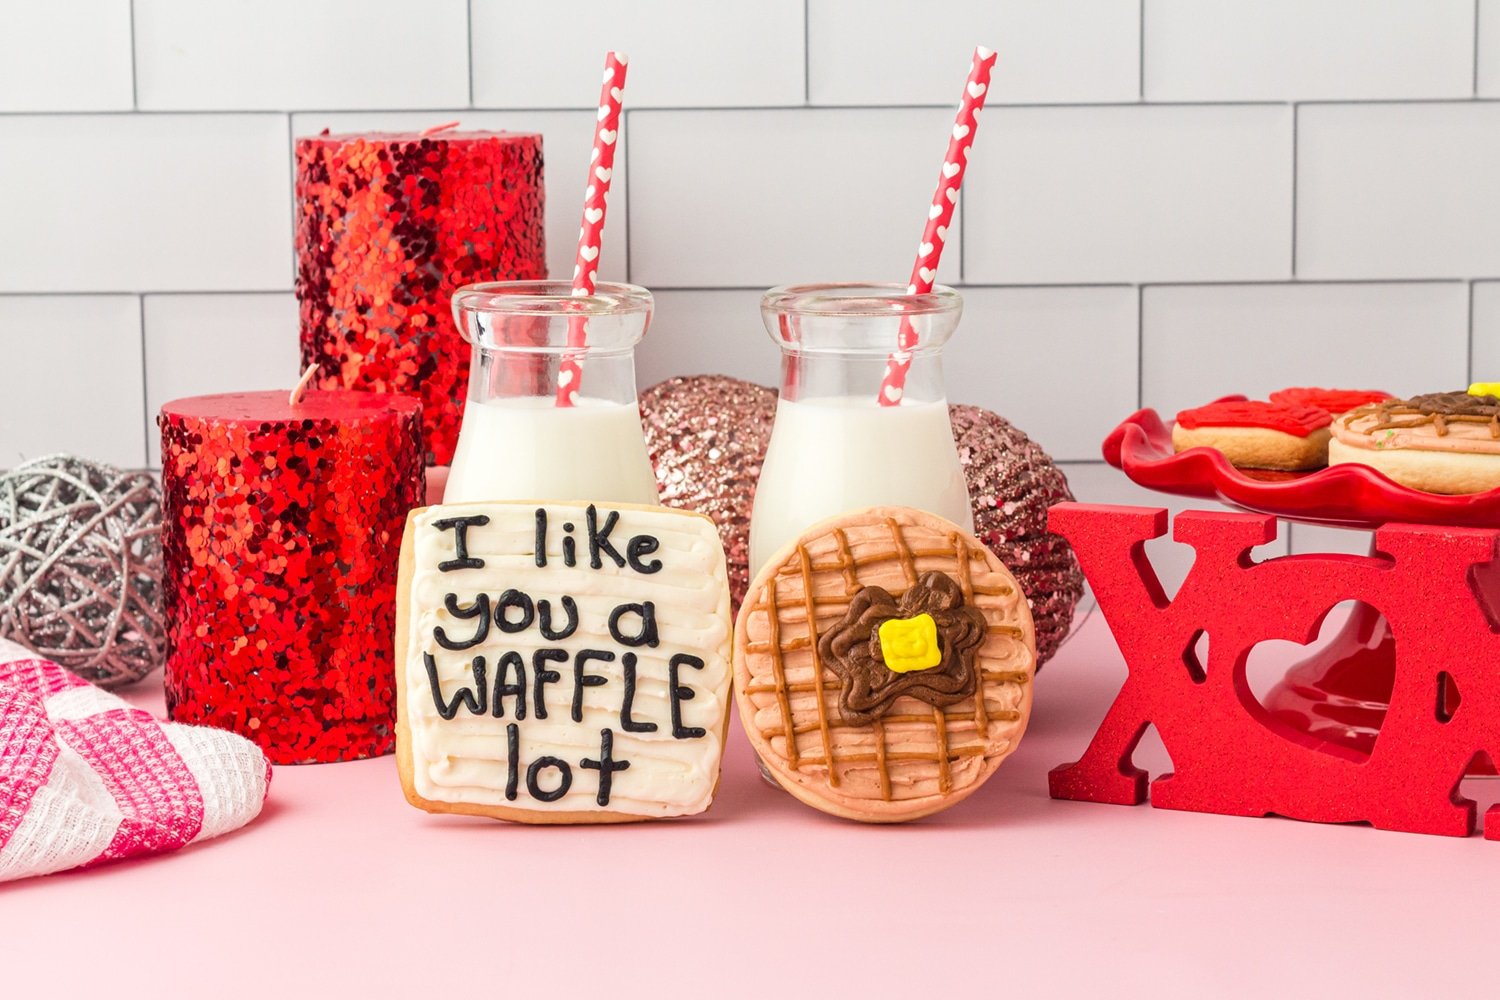 "I like you a waffle lot" and waffle sugar cookies with two small bottles of milk